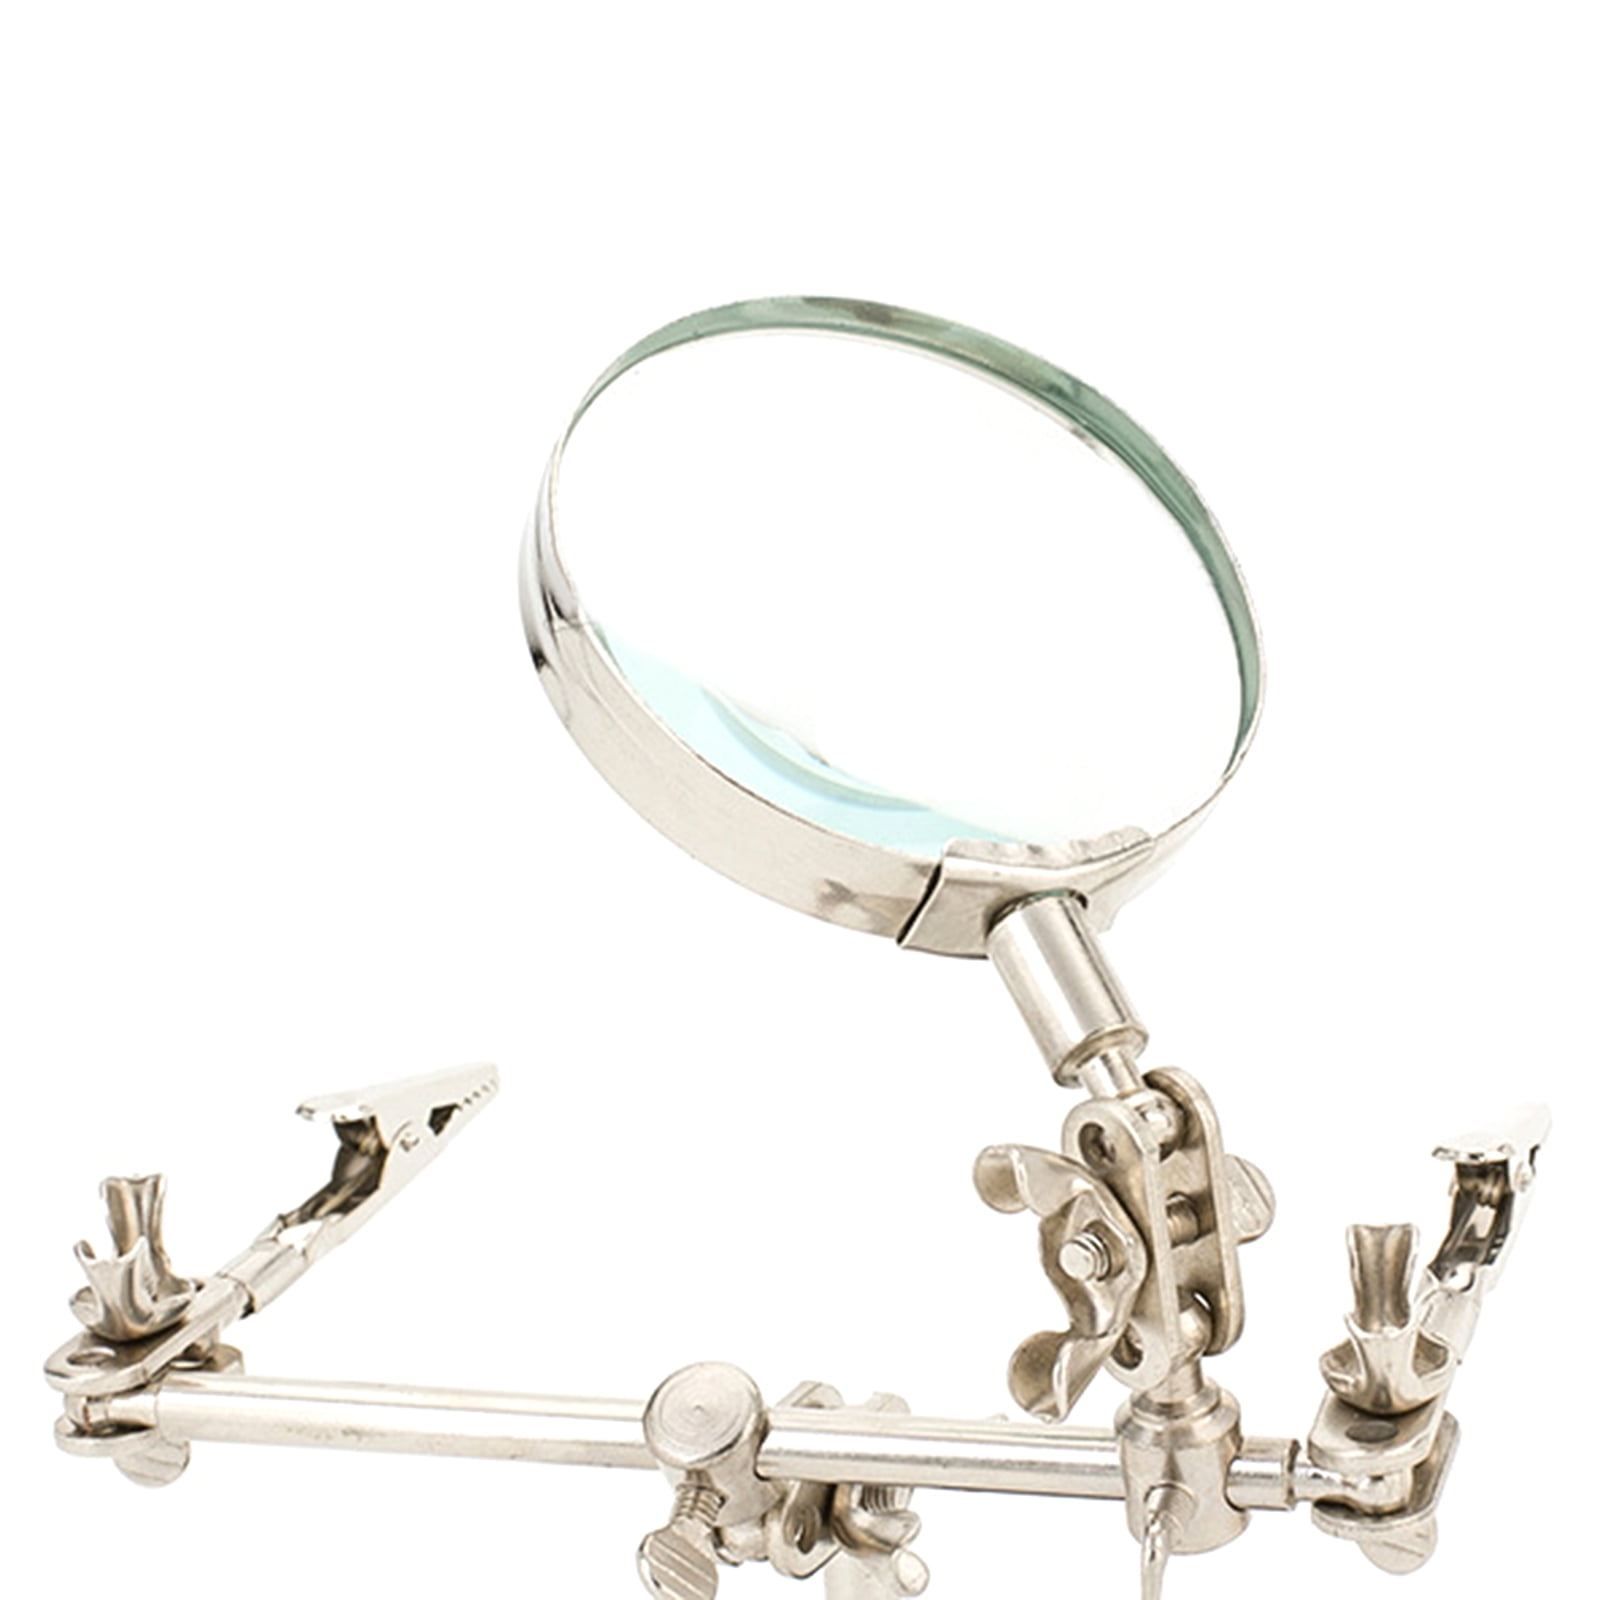 Ram-Pro Helping Hands Magnifier Glass Stand with Alligator Clips – 4X  Magnifying Lens, Perfect for Soldering, Crafting & Inspecting Micro Objects